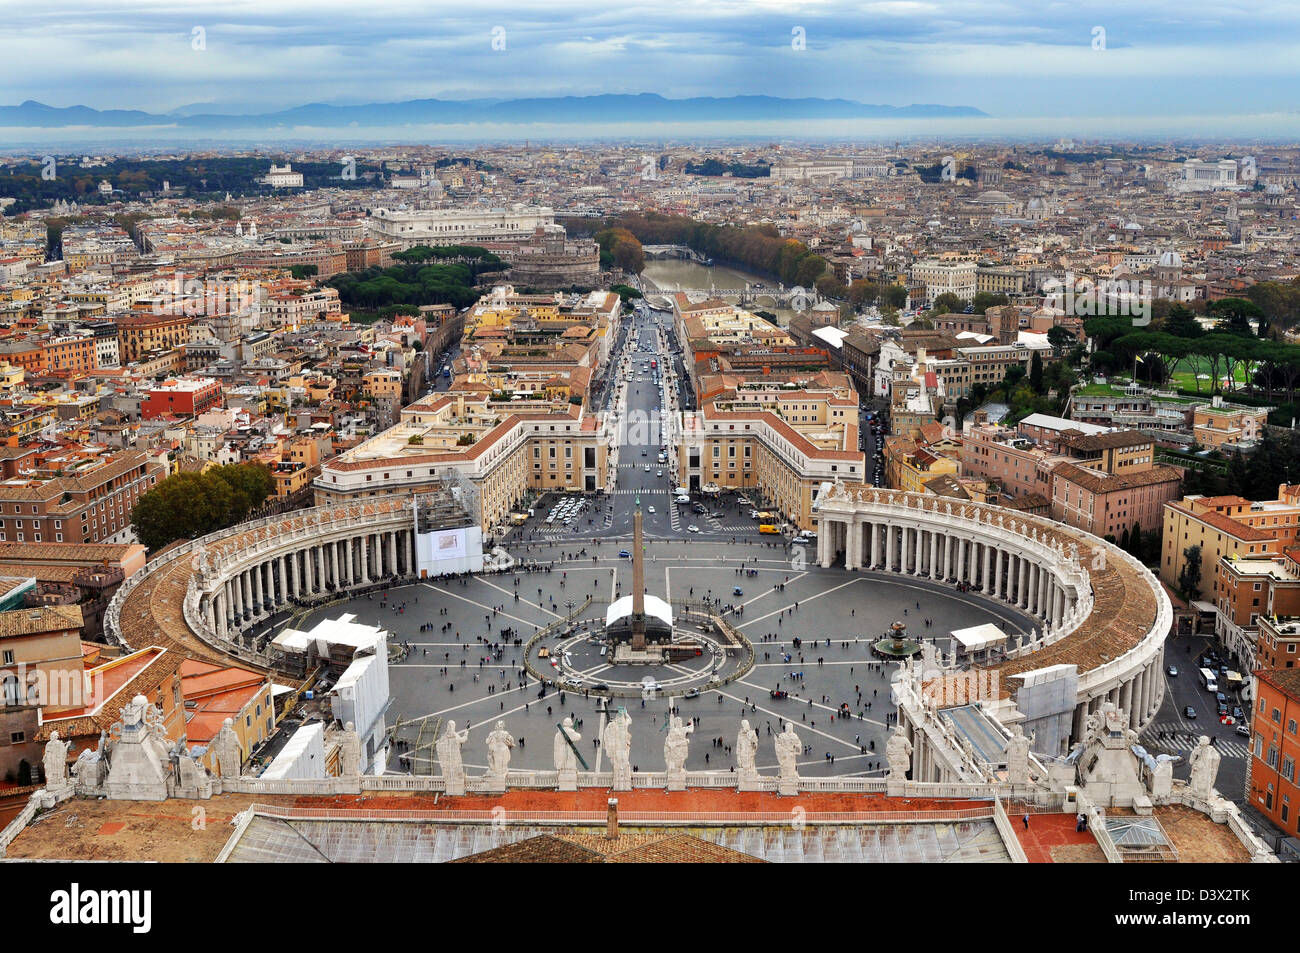 Vatican City Rome, viewed from the top of St Peter's Basilica, and overlooking St Peter's Square, Rome, Italy. Stock Photo